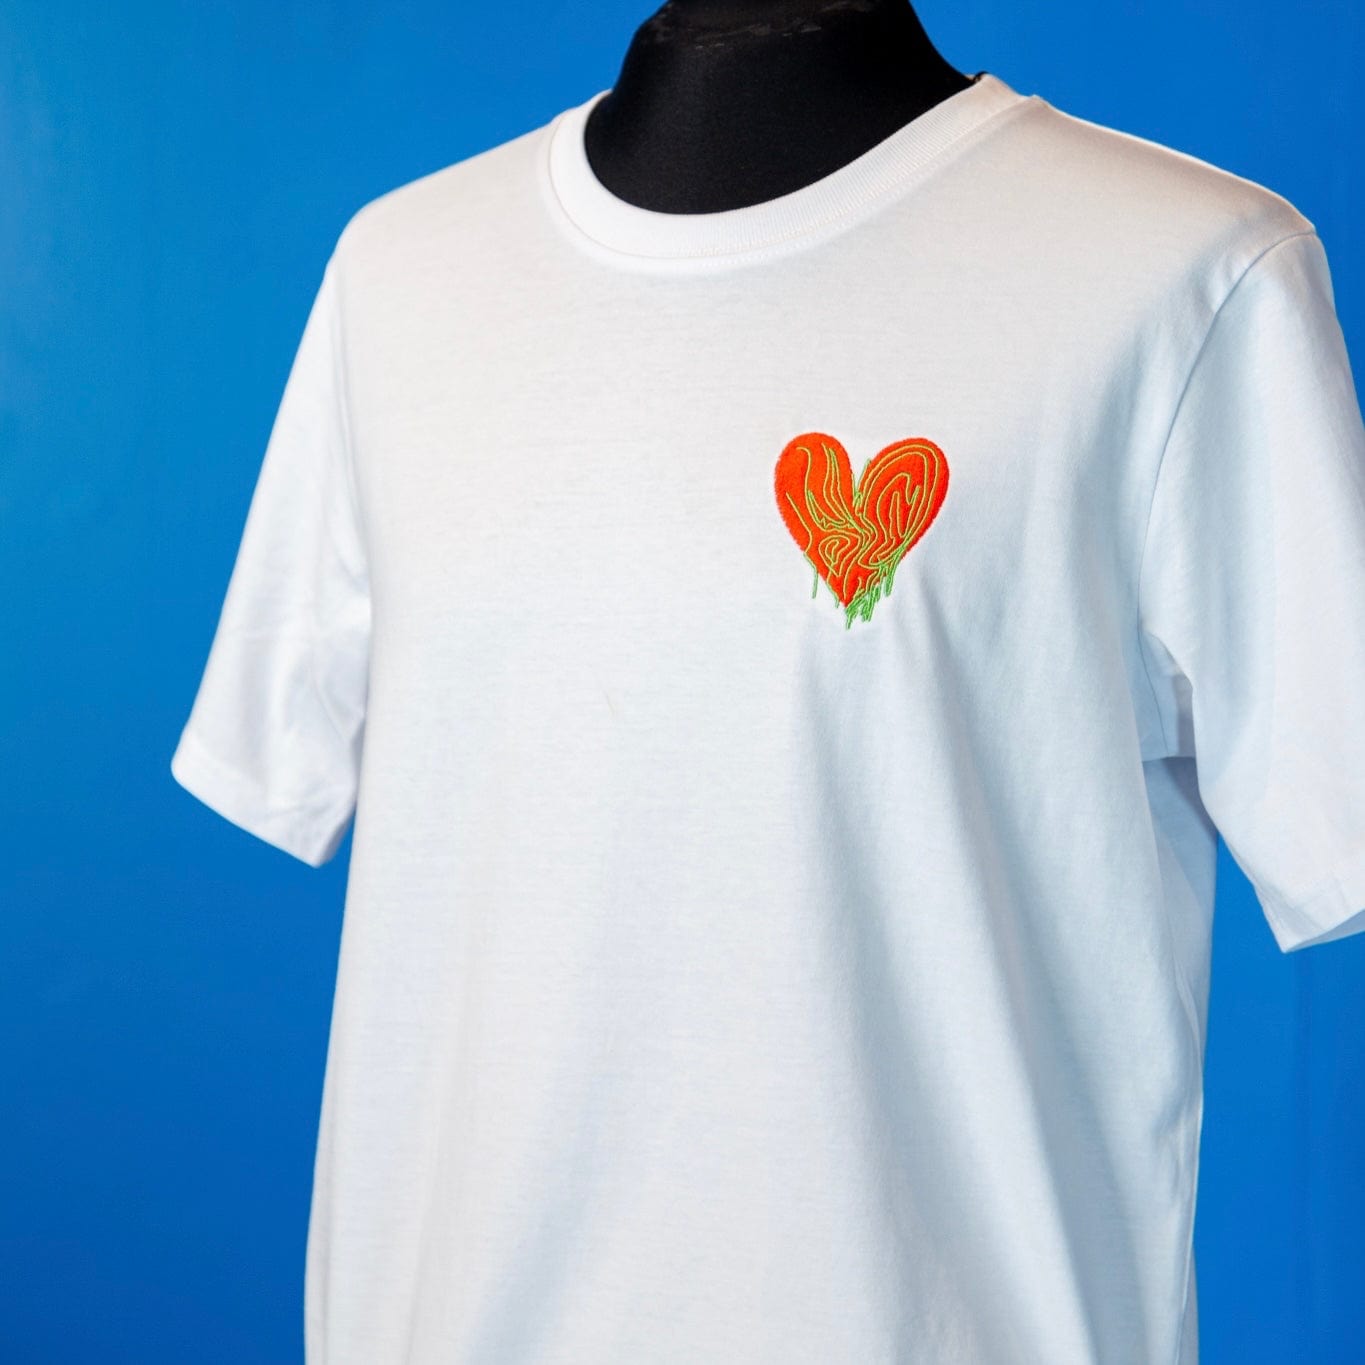 Nicole Chui x Migration Museum Embroidered Heart Organic T-shirt - White - Migration Museum Shop